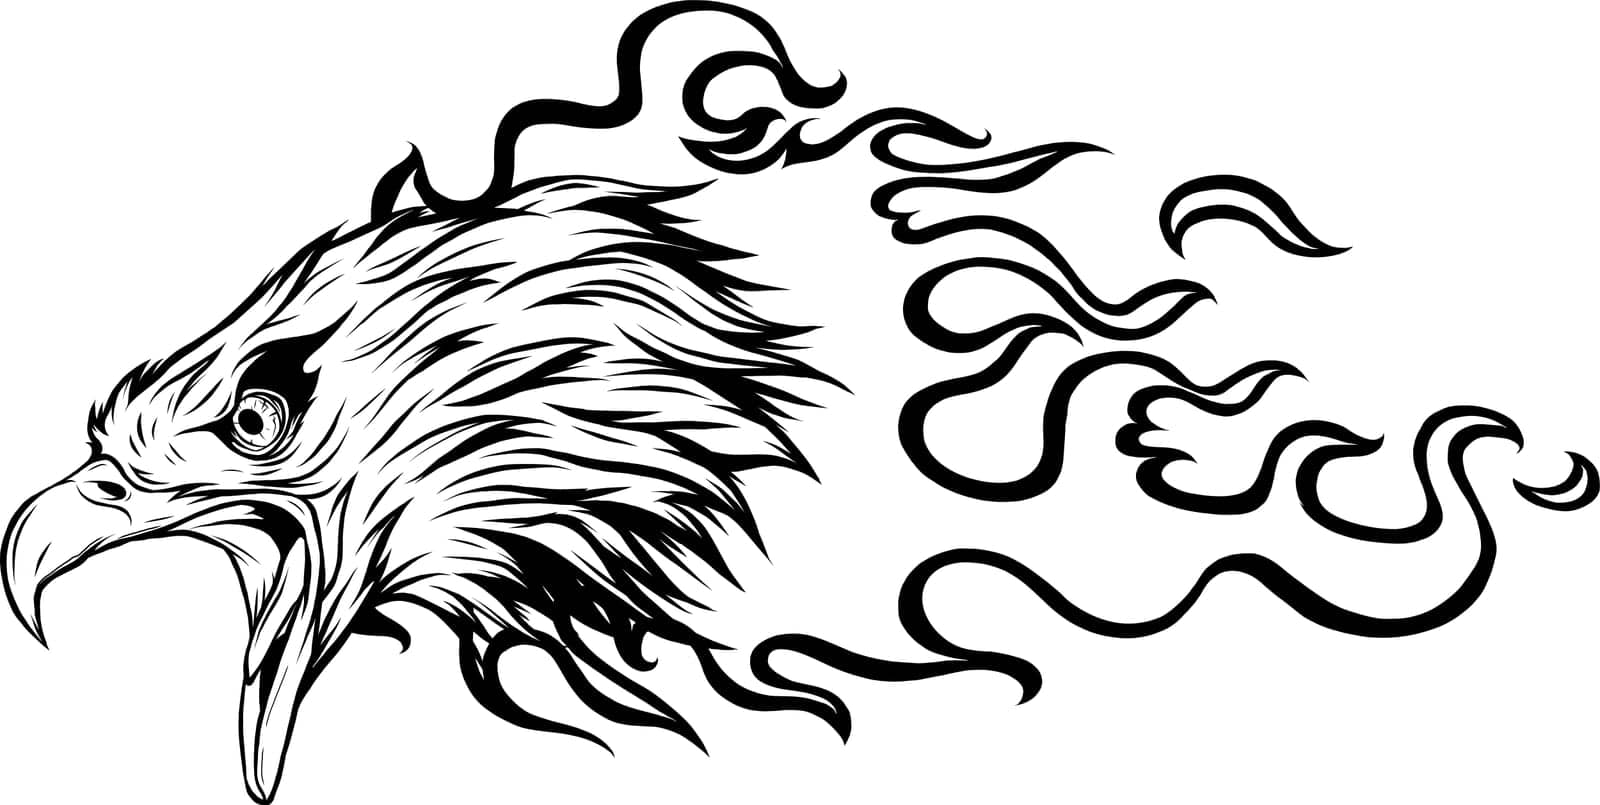 vector illustratio of monochrome head eagle with flames on white background by dean